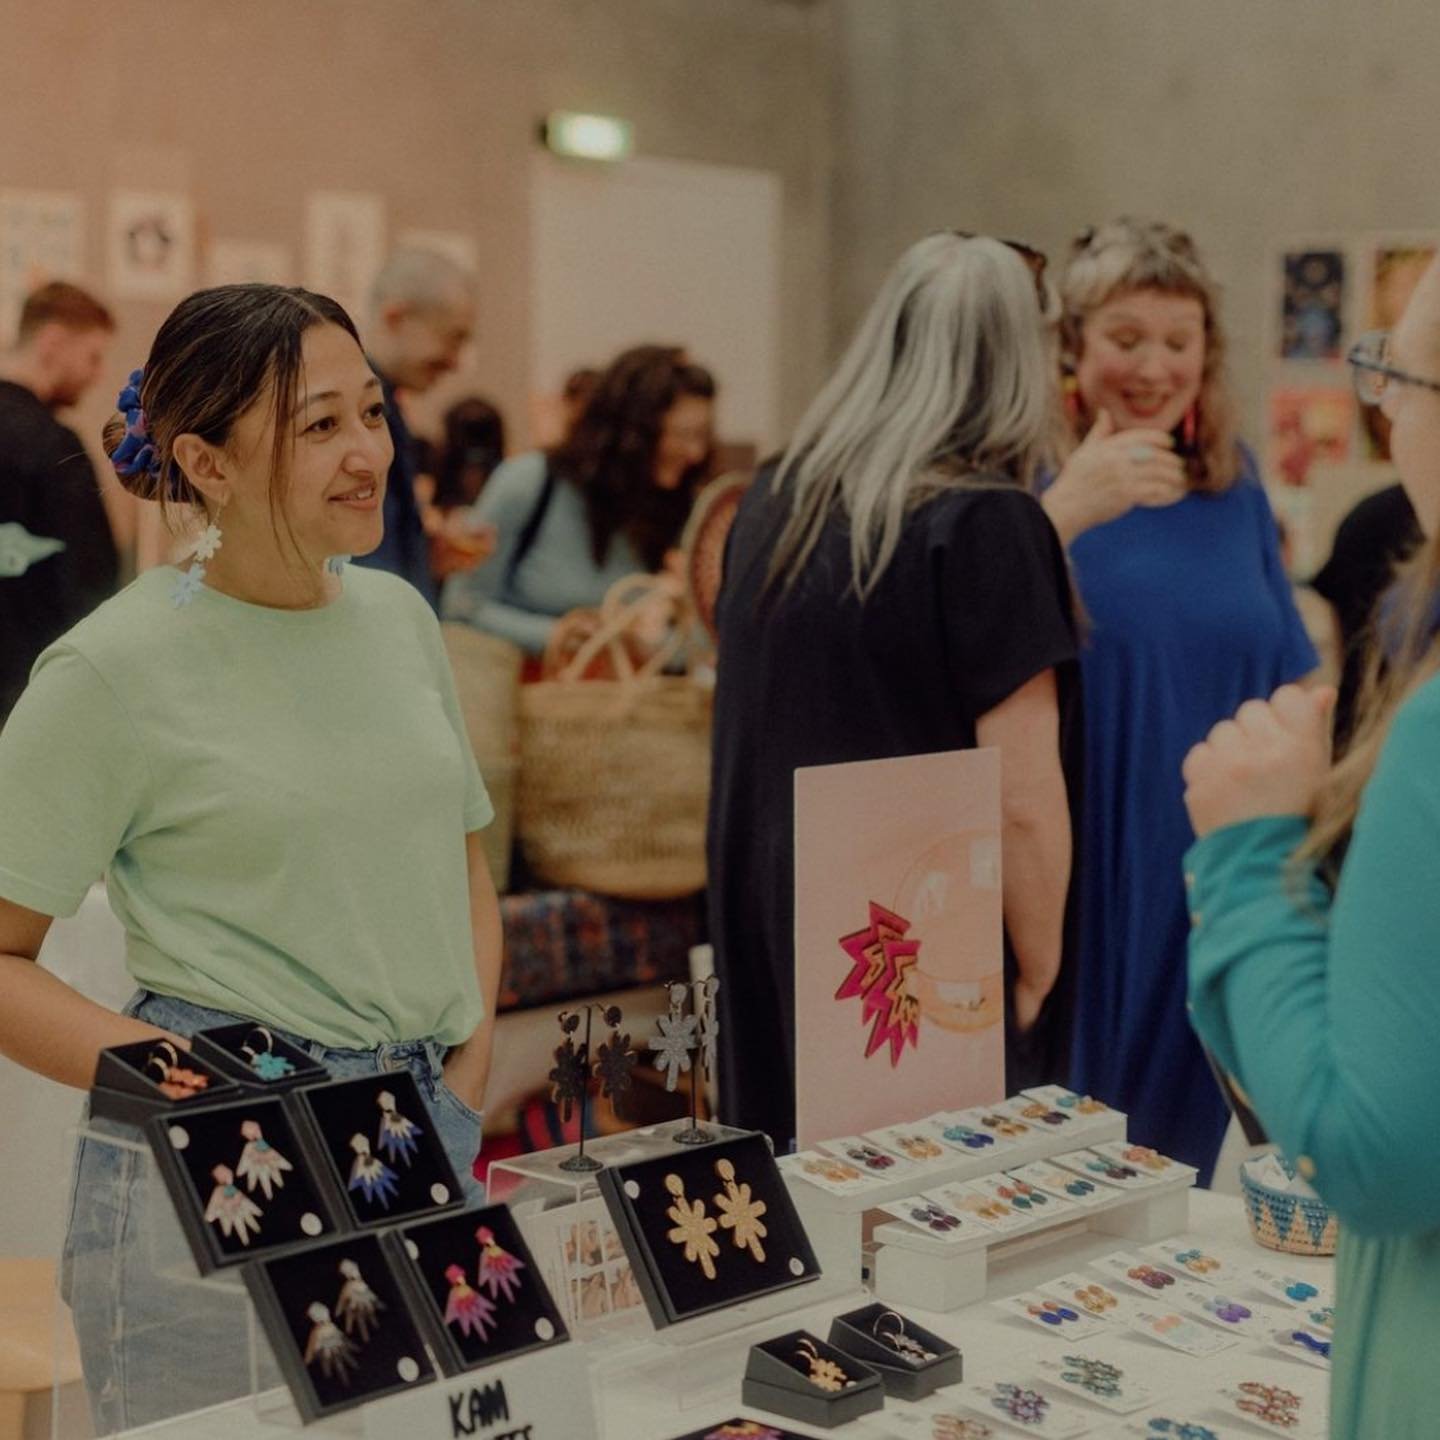 A few snaps from last summer when I joined @nottm_contemp for their Summer event 🌞 My first time in Nottingham and it was ace 💚

I do love a road trip, and even better if I can bring my jewellery and make friends along the way so if you know of any